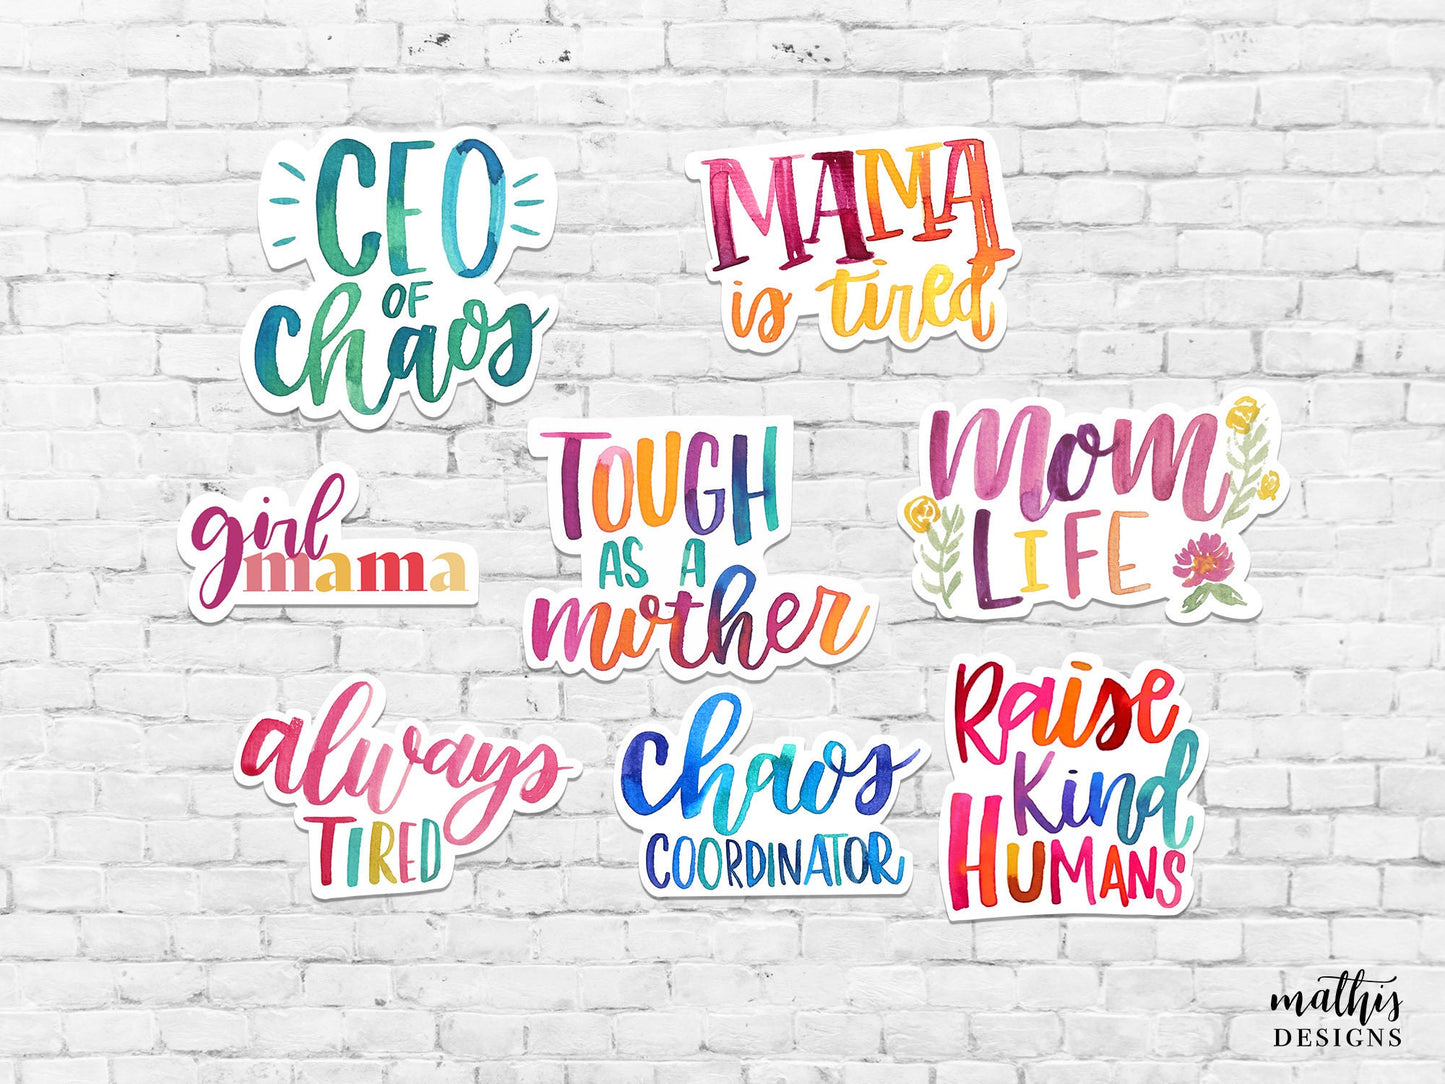 Mom Life Stickers, Sticker Set of 8, Stickers for Moms, Motherhood Stickers, Parenting Decals, Gift